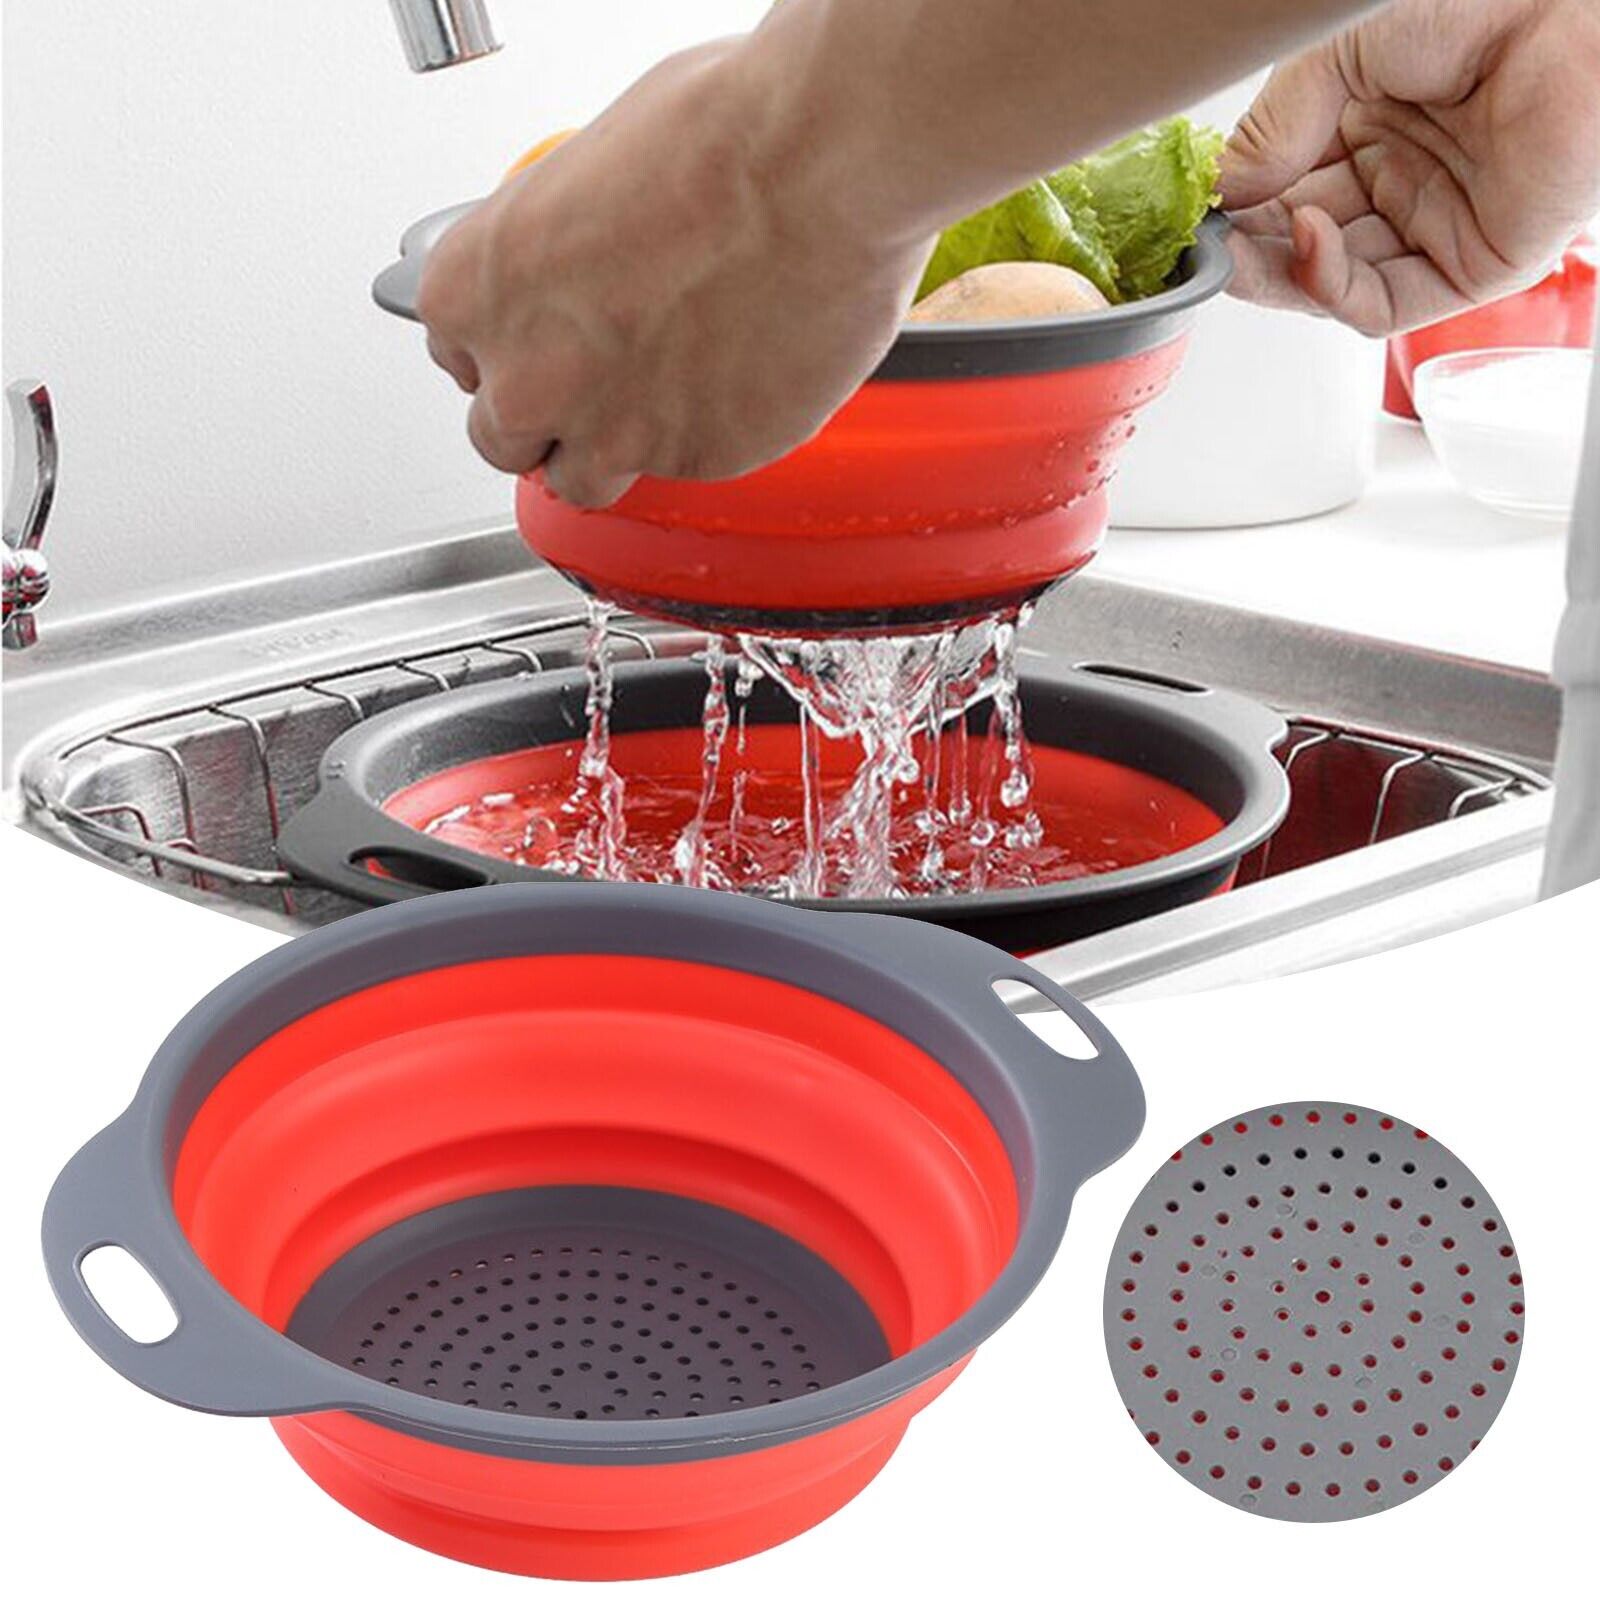 Kitchen Collapsible Colander Round Silicone Foldable Fruit Vegetable Strainer AU